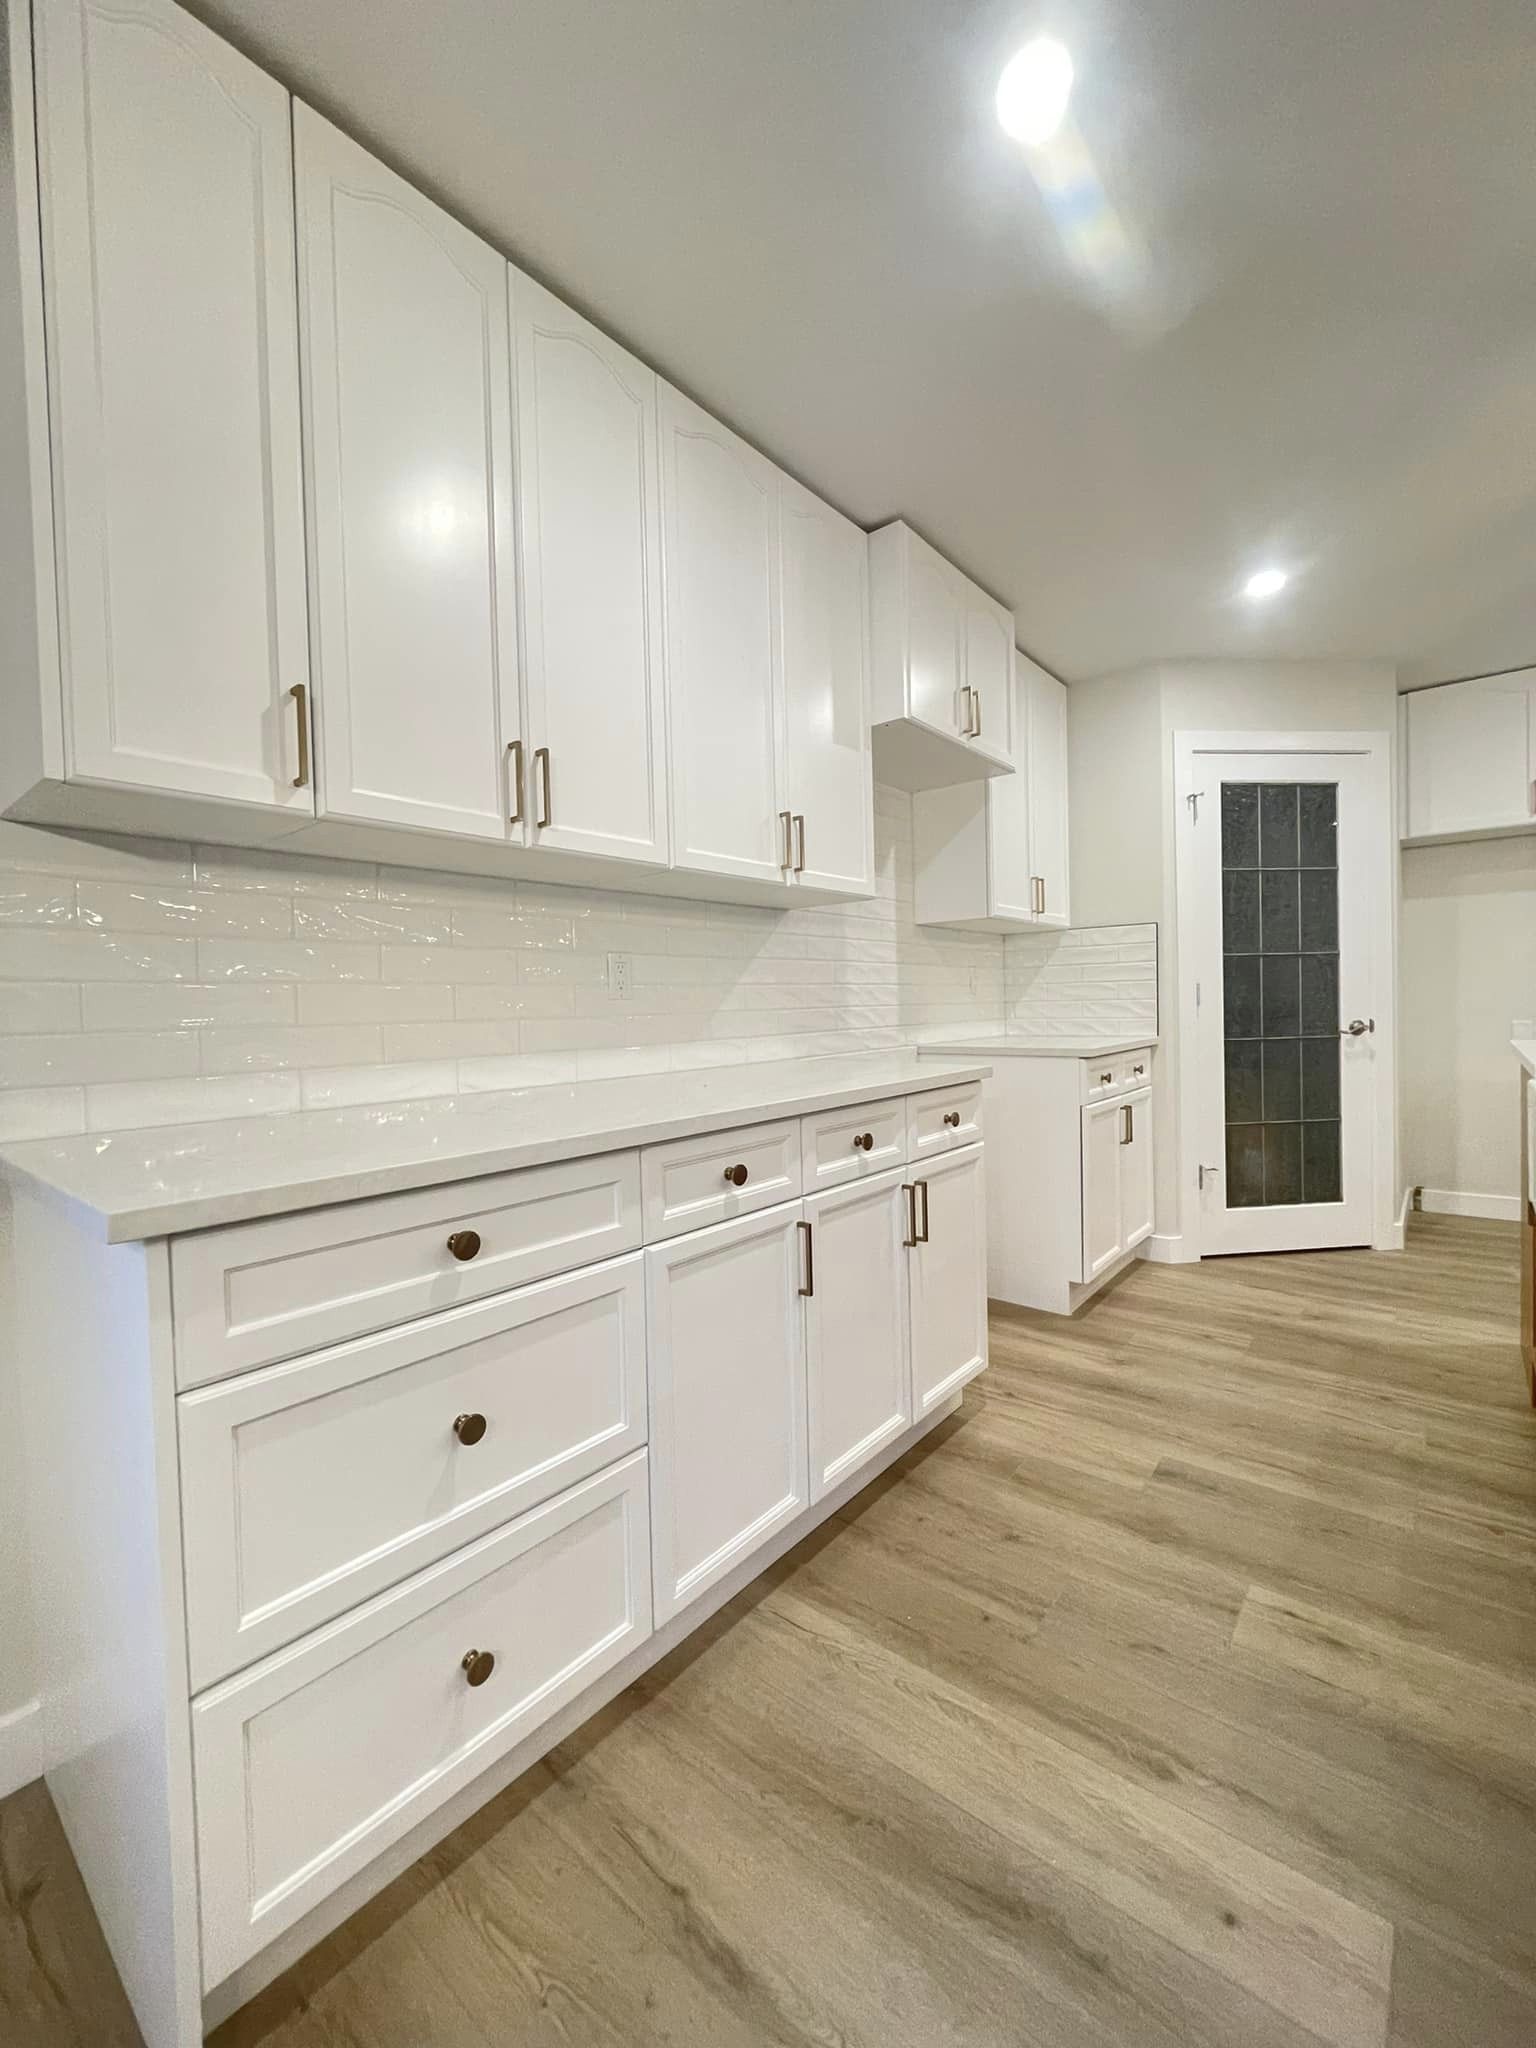 Wide view of a modern kitchen with newly renovated flooring, pantry, counters, and cupboards.